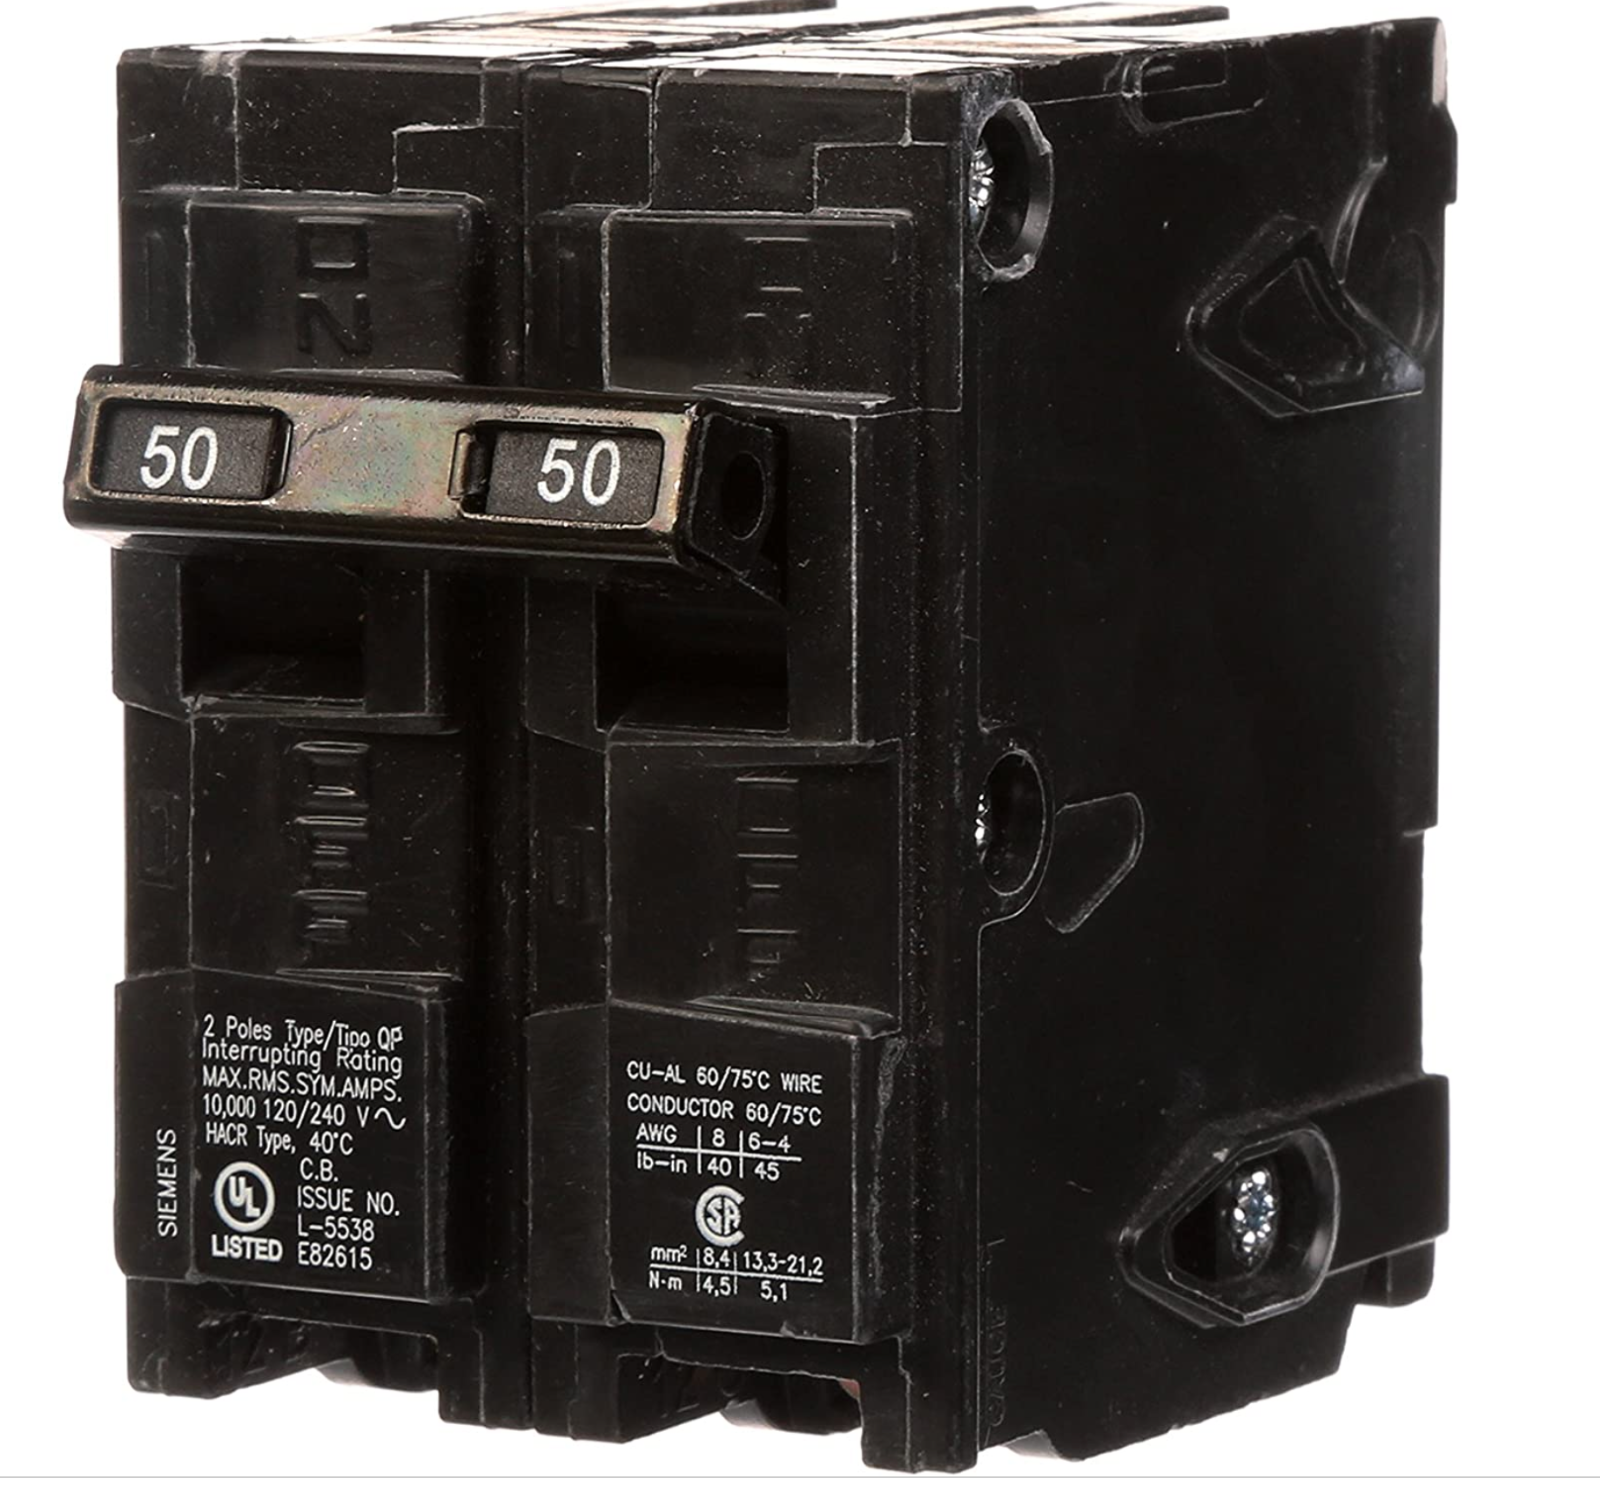 Primary image for Q250 50-Amp Double Pole Type QP Circuit Breaker